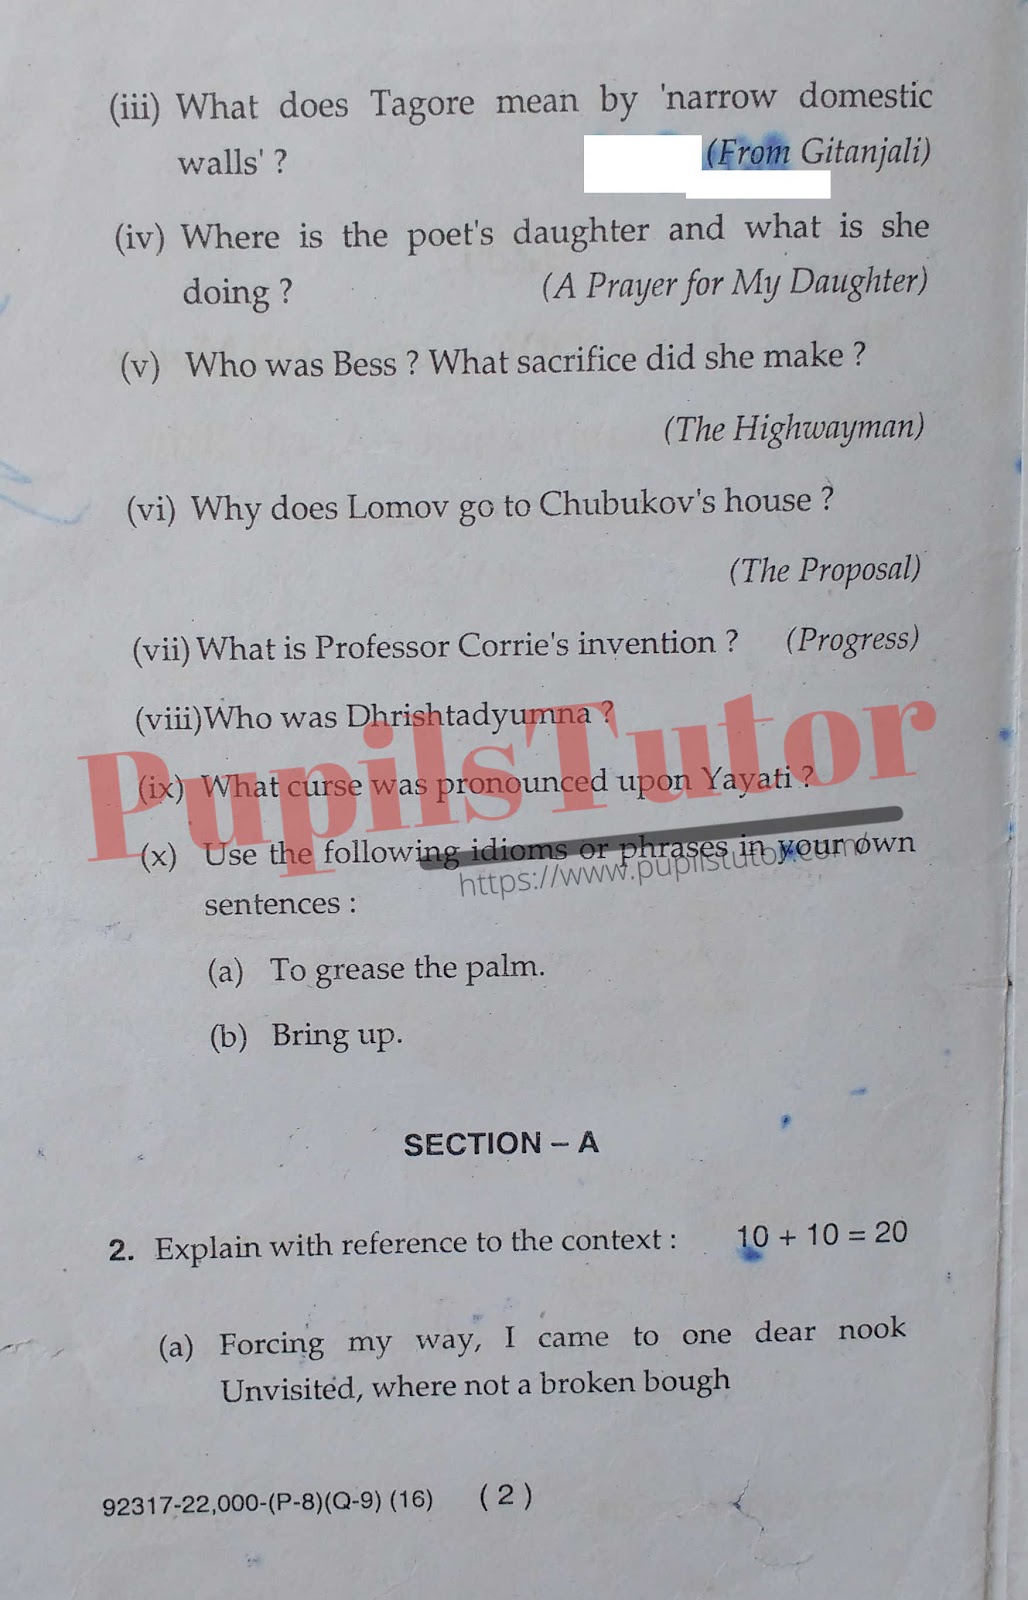 M.D. University B.A. English (Compulsory) Second Year Important Question Answer And Solution - www.pupilstutor.com (Paper Page Number 2)